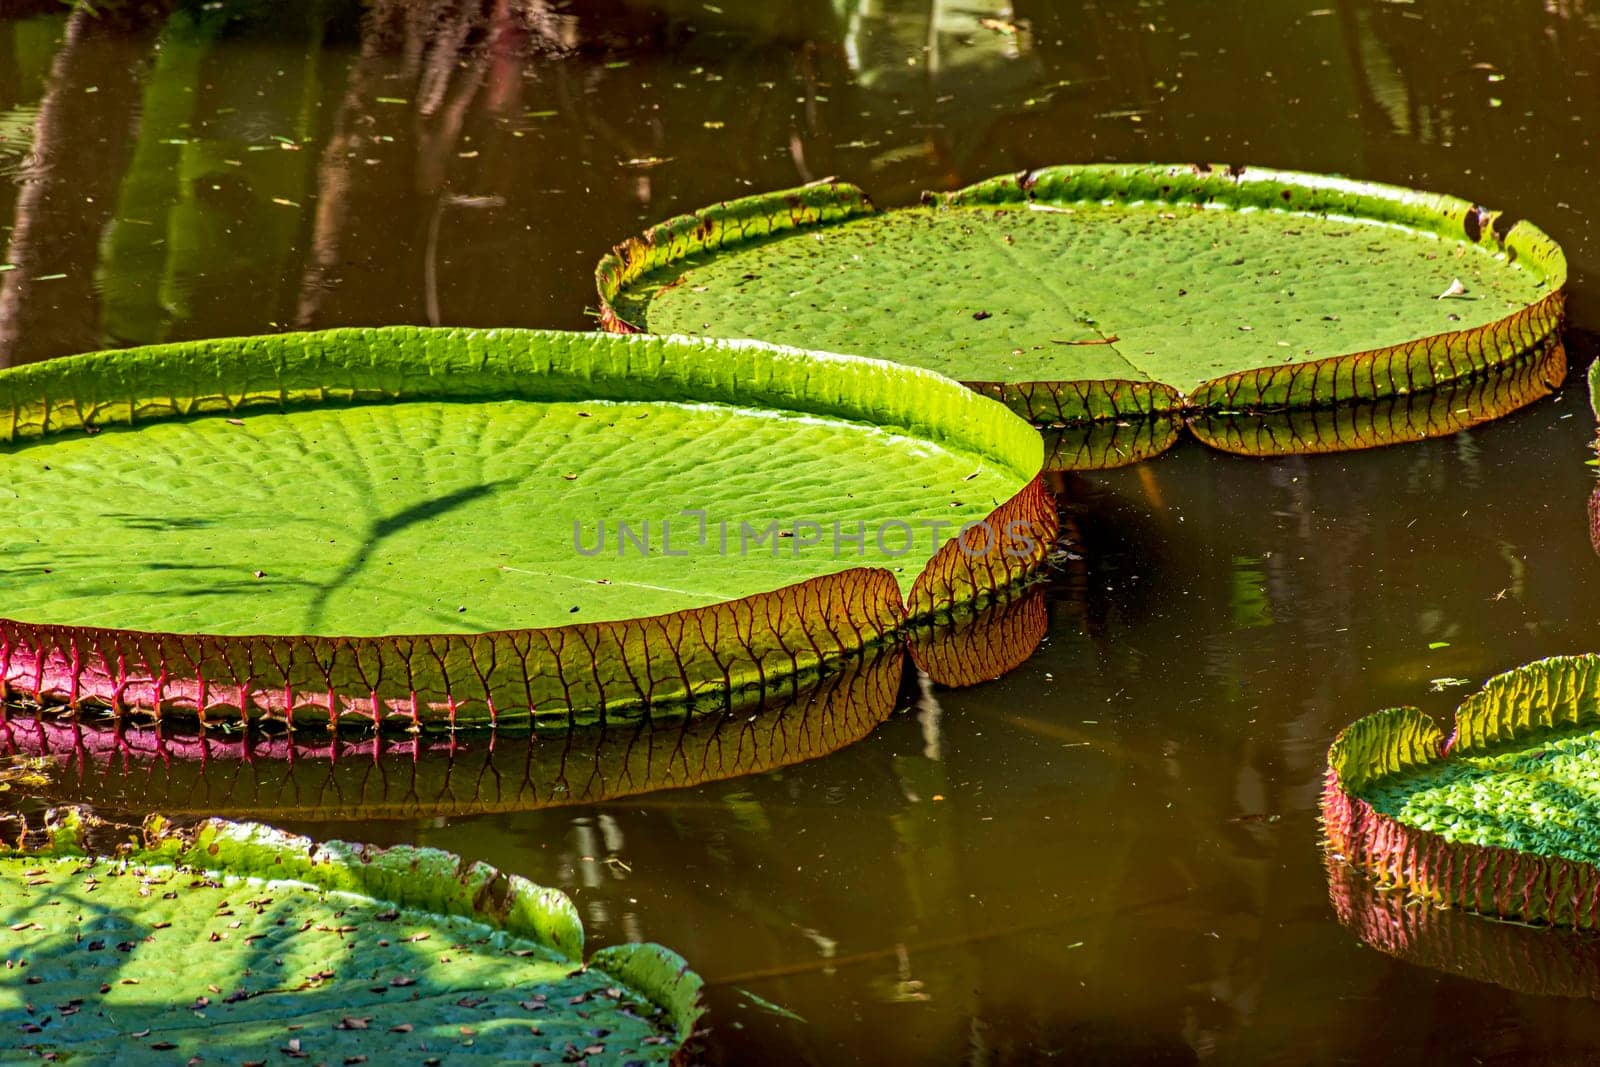 Water Lily typical of the Amazon with its characteristic circular shape floating on the calm waters of a lake